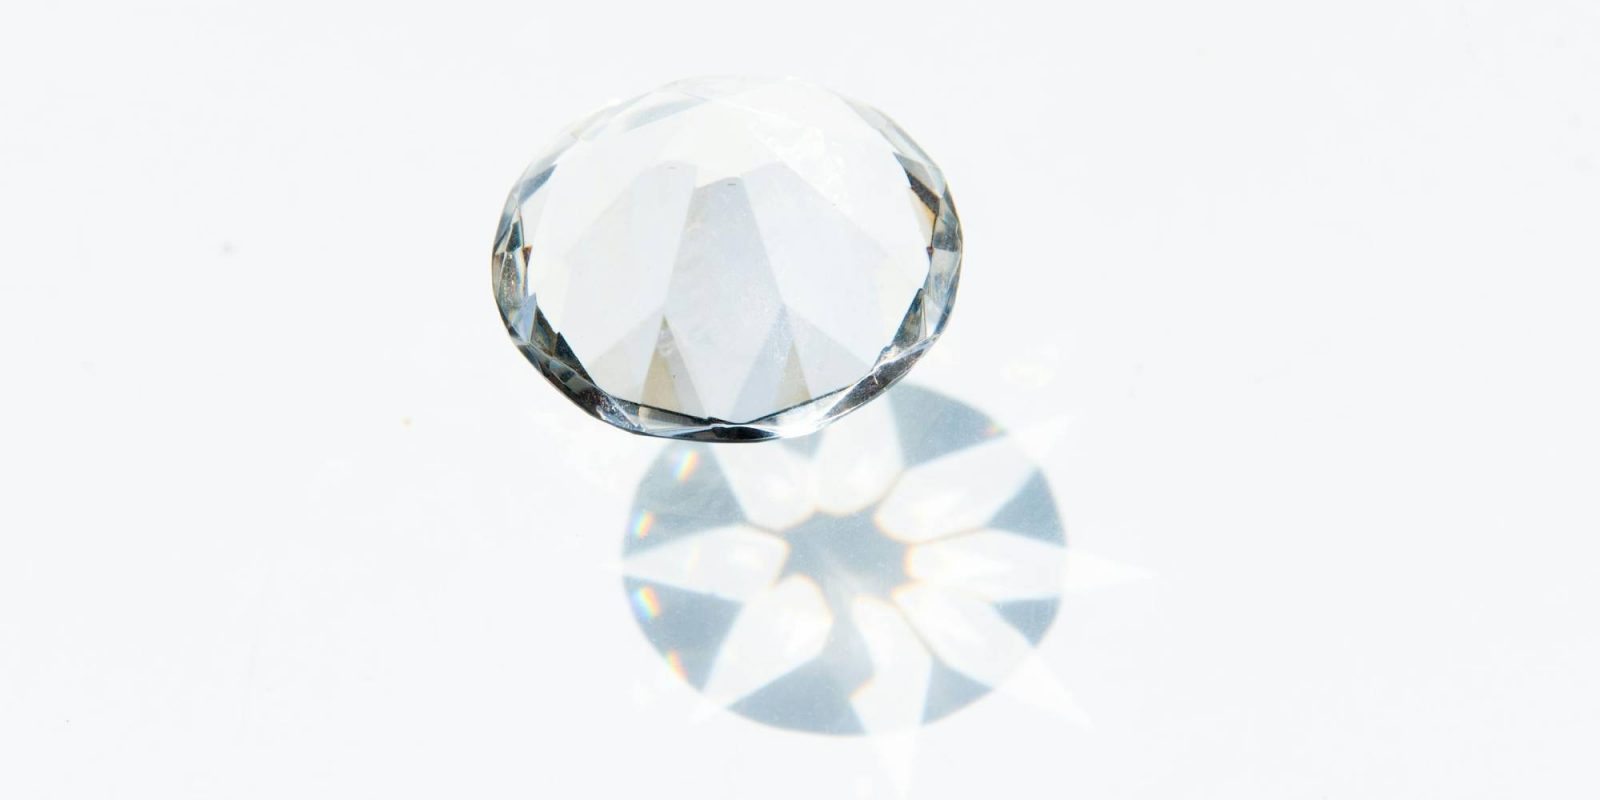 What Is a Lab-Grown Diamond, and Is It As Precious As Mined Ones?